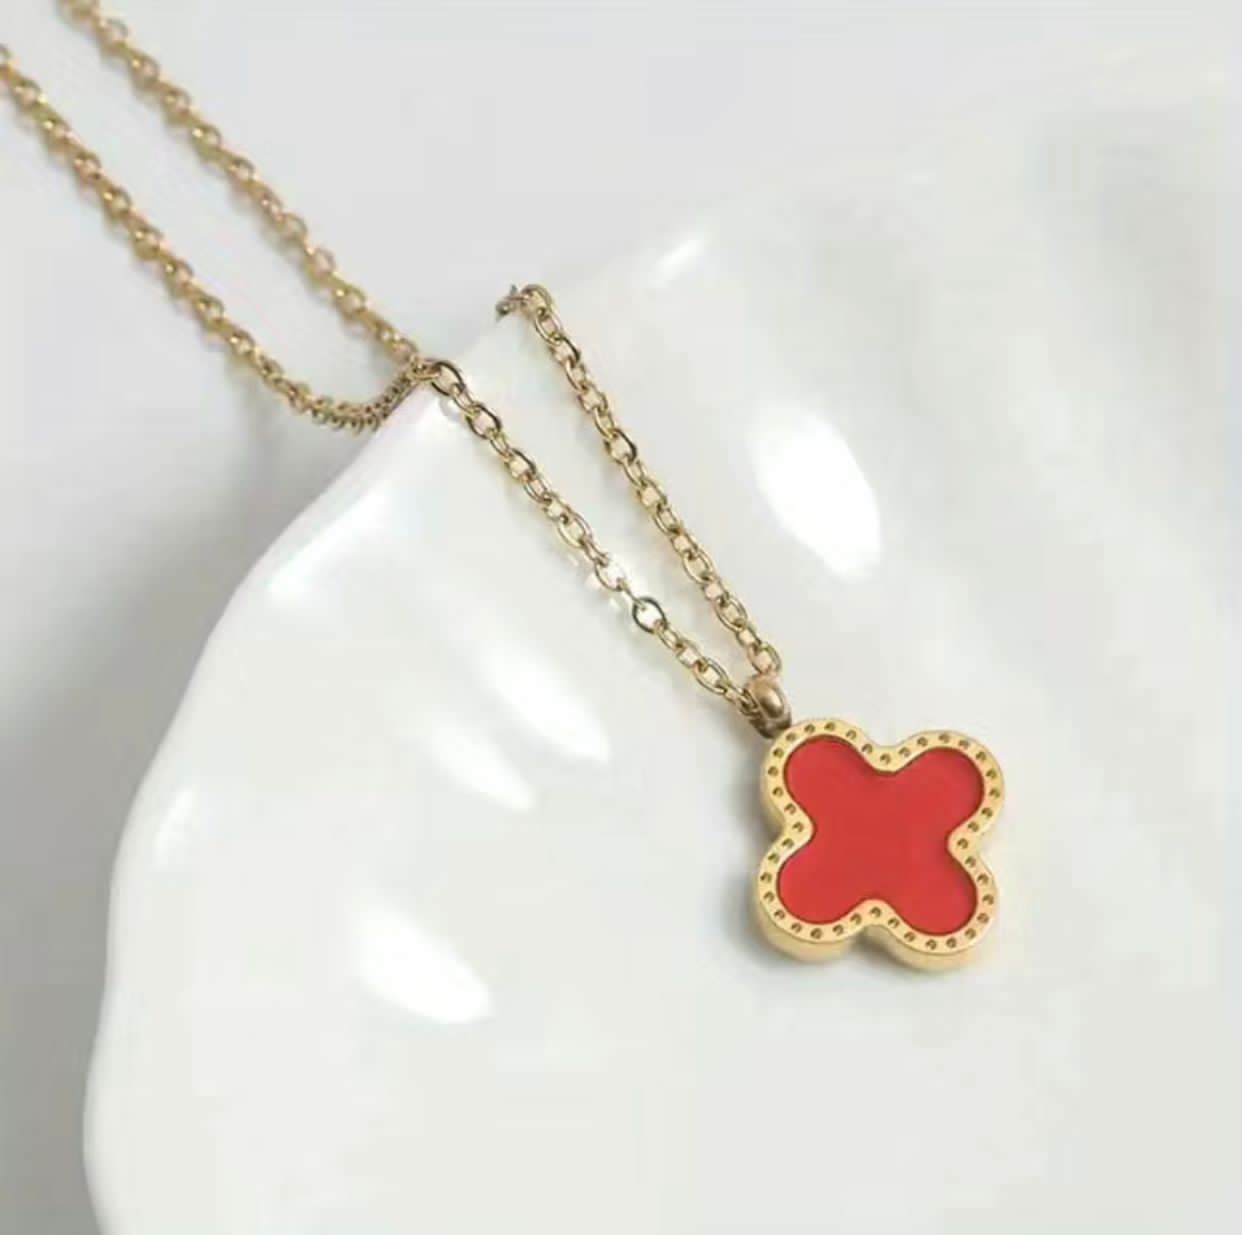 Gold Plated Clover Leaf Necklace with Colored Pendant